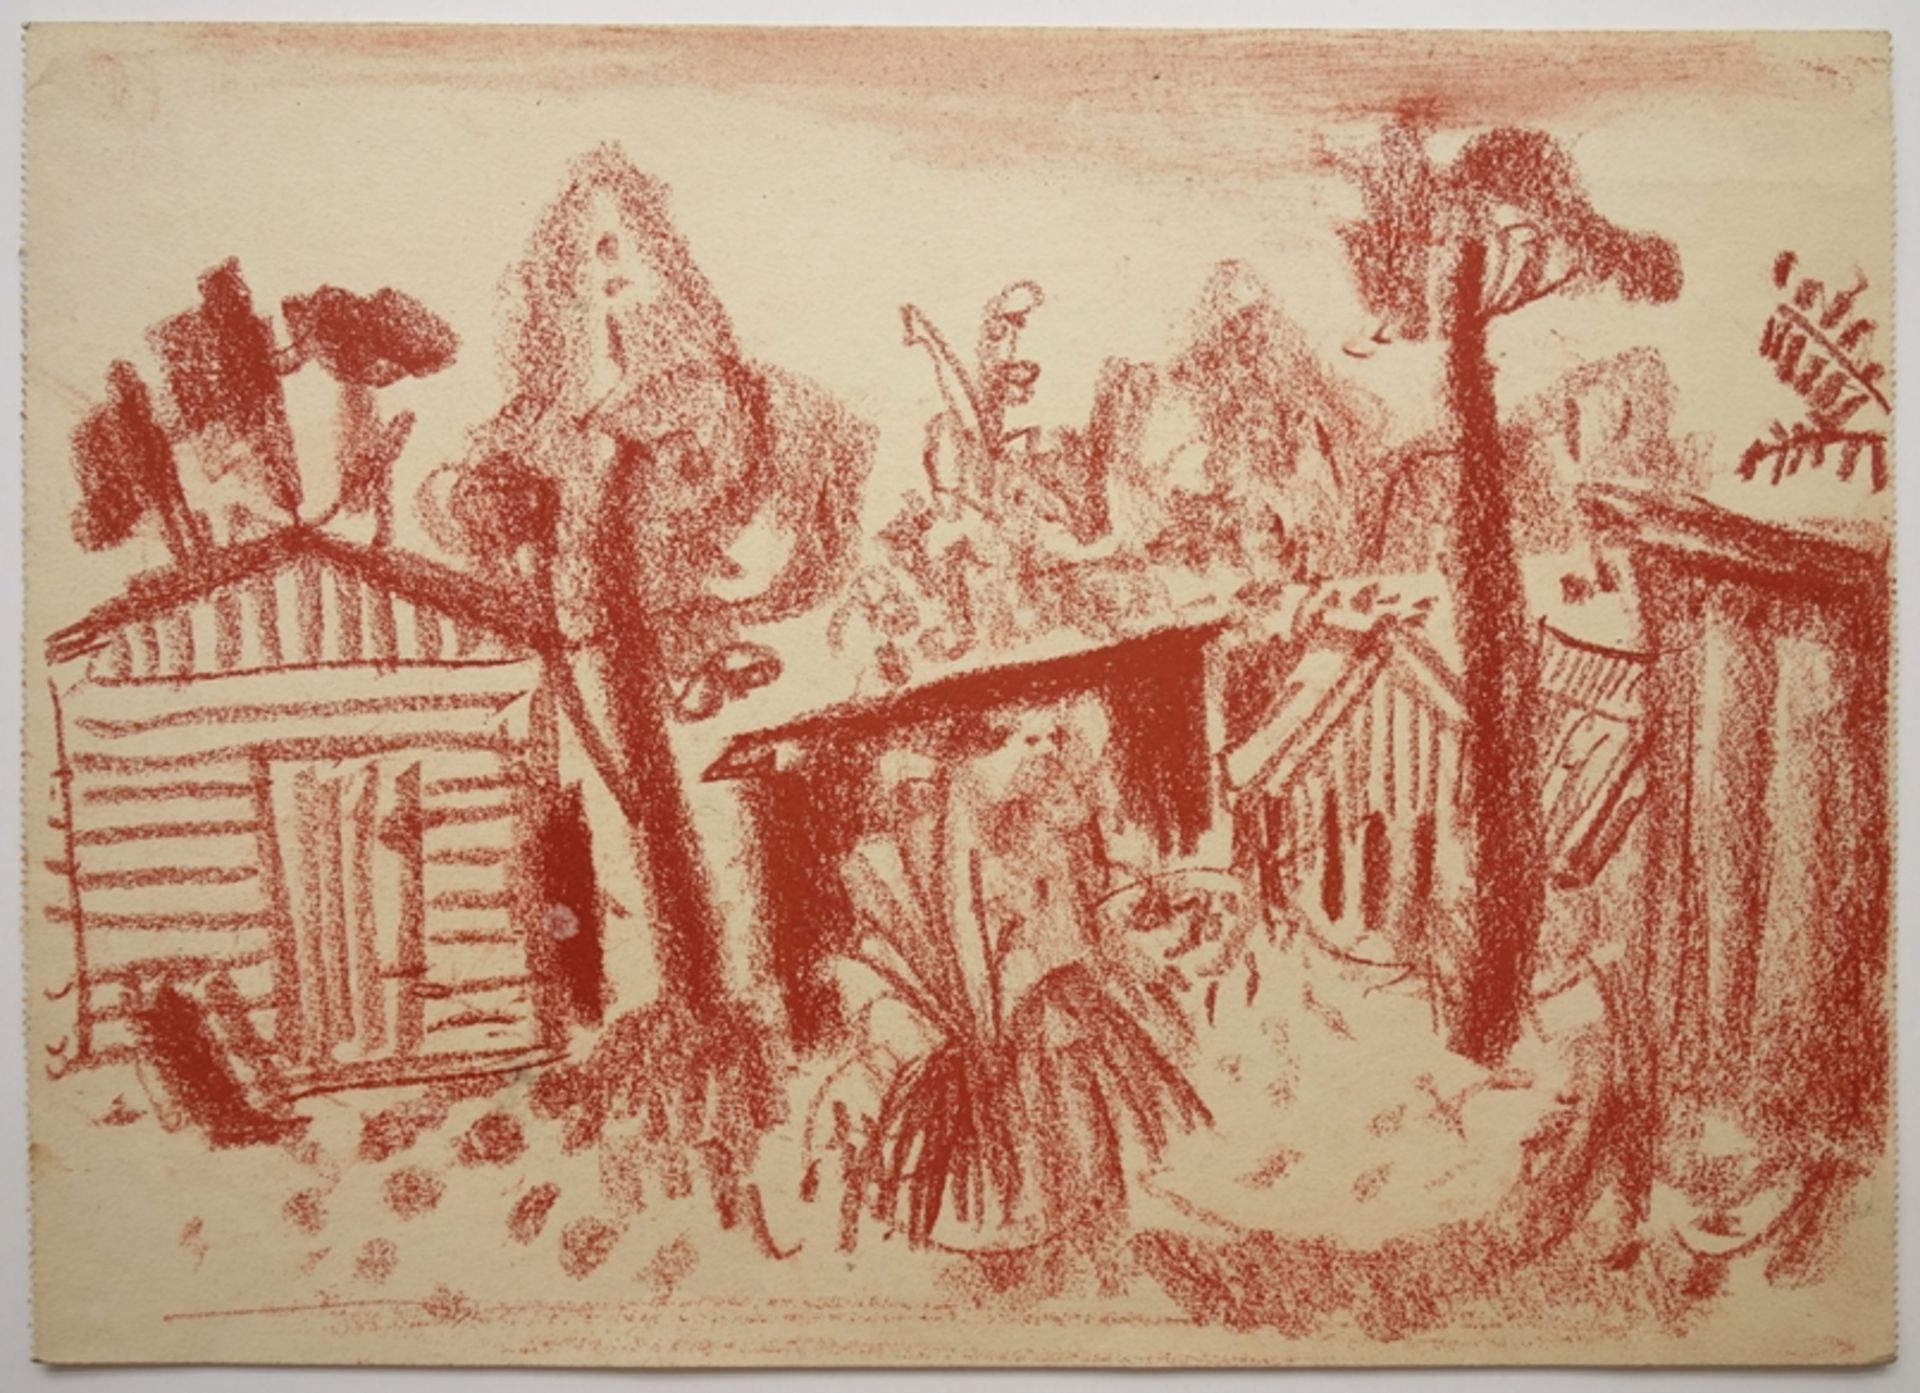 Paul Kuhfuss (1883, Berlin - 1960, ibid.), "Bungalows in an overgrown landscape", approx. 1955, red